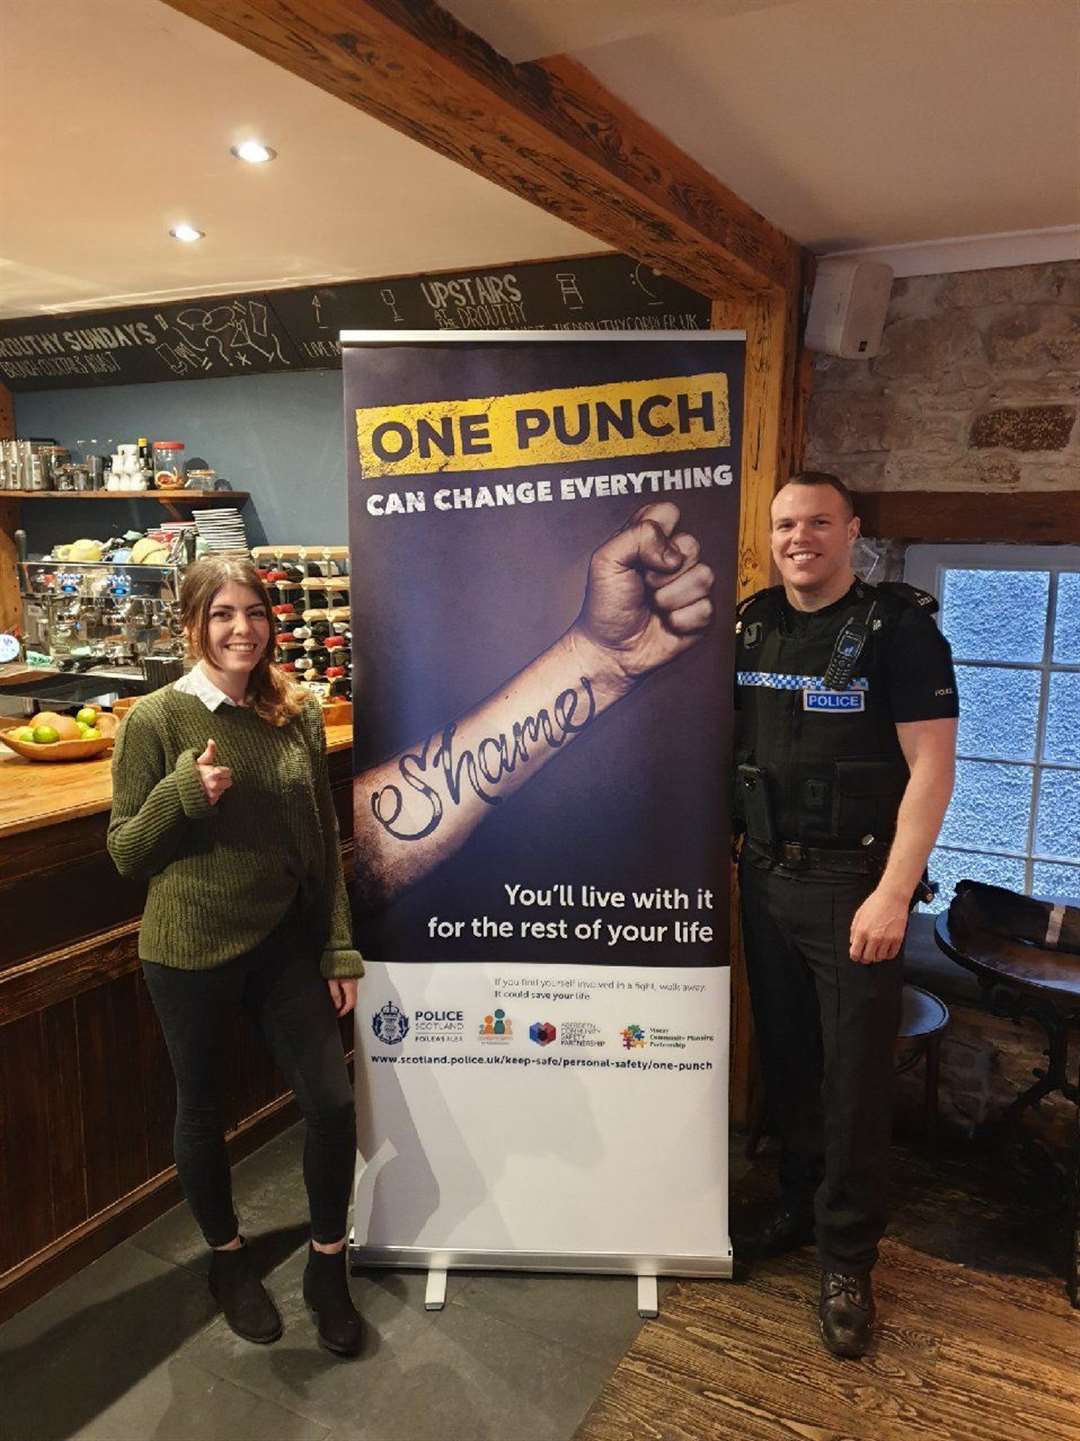 Police involved pubs in the launch of their "One Punch" campaign, including the Drouthy Cobbler in Elgin.